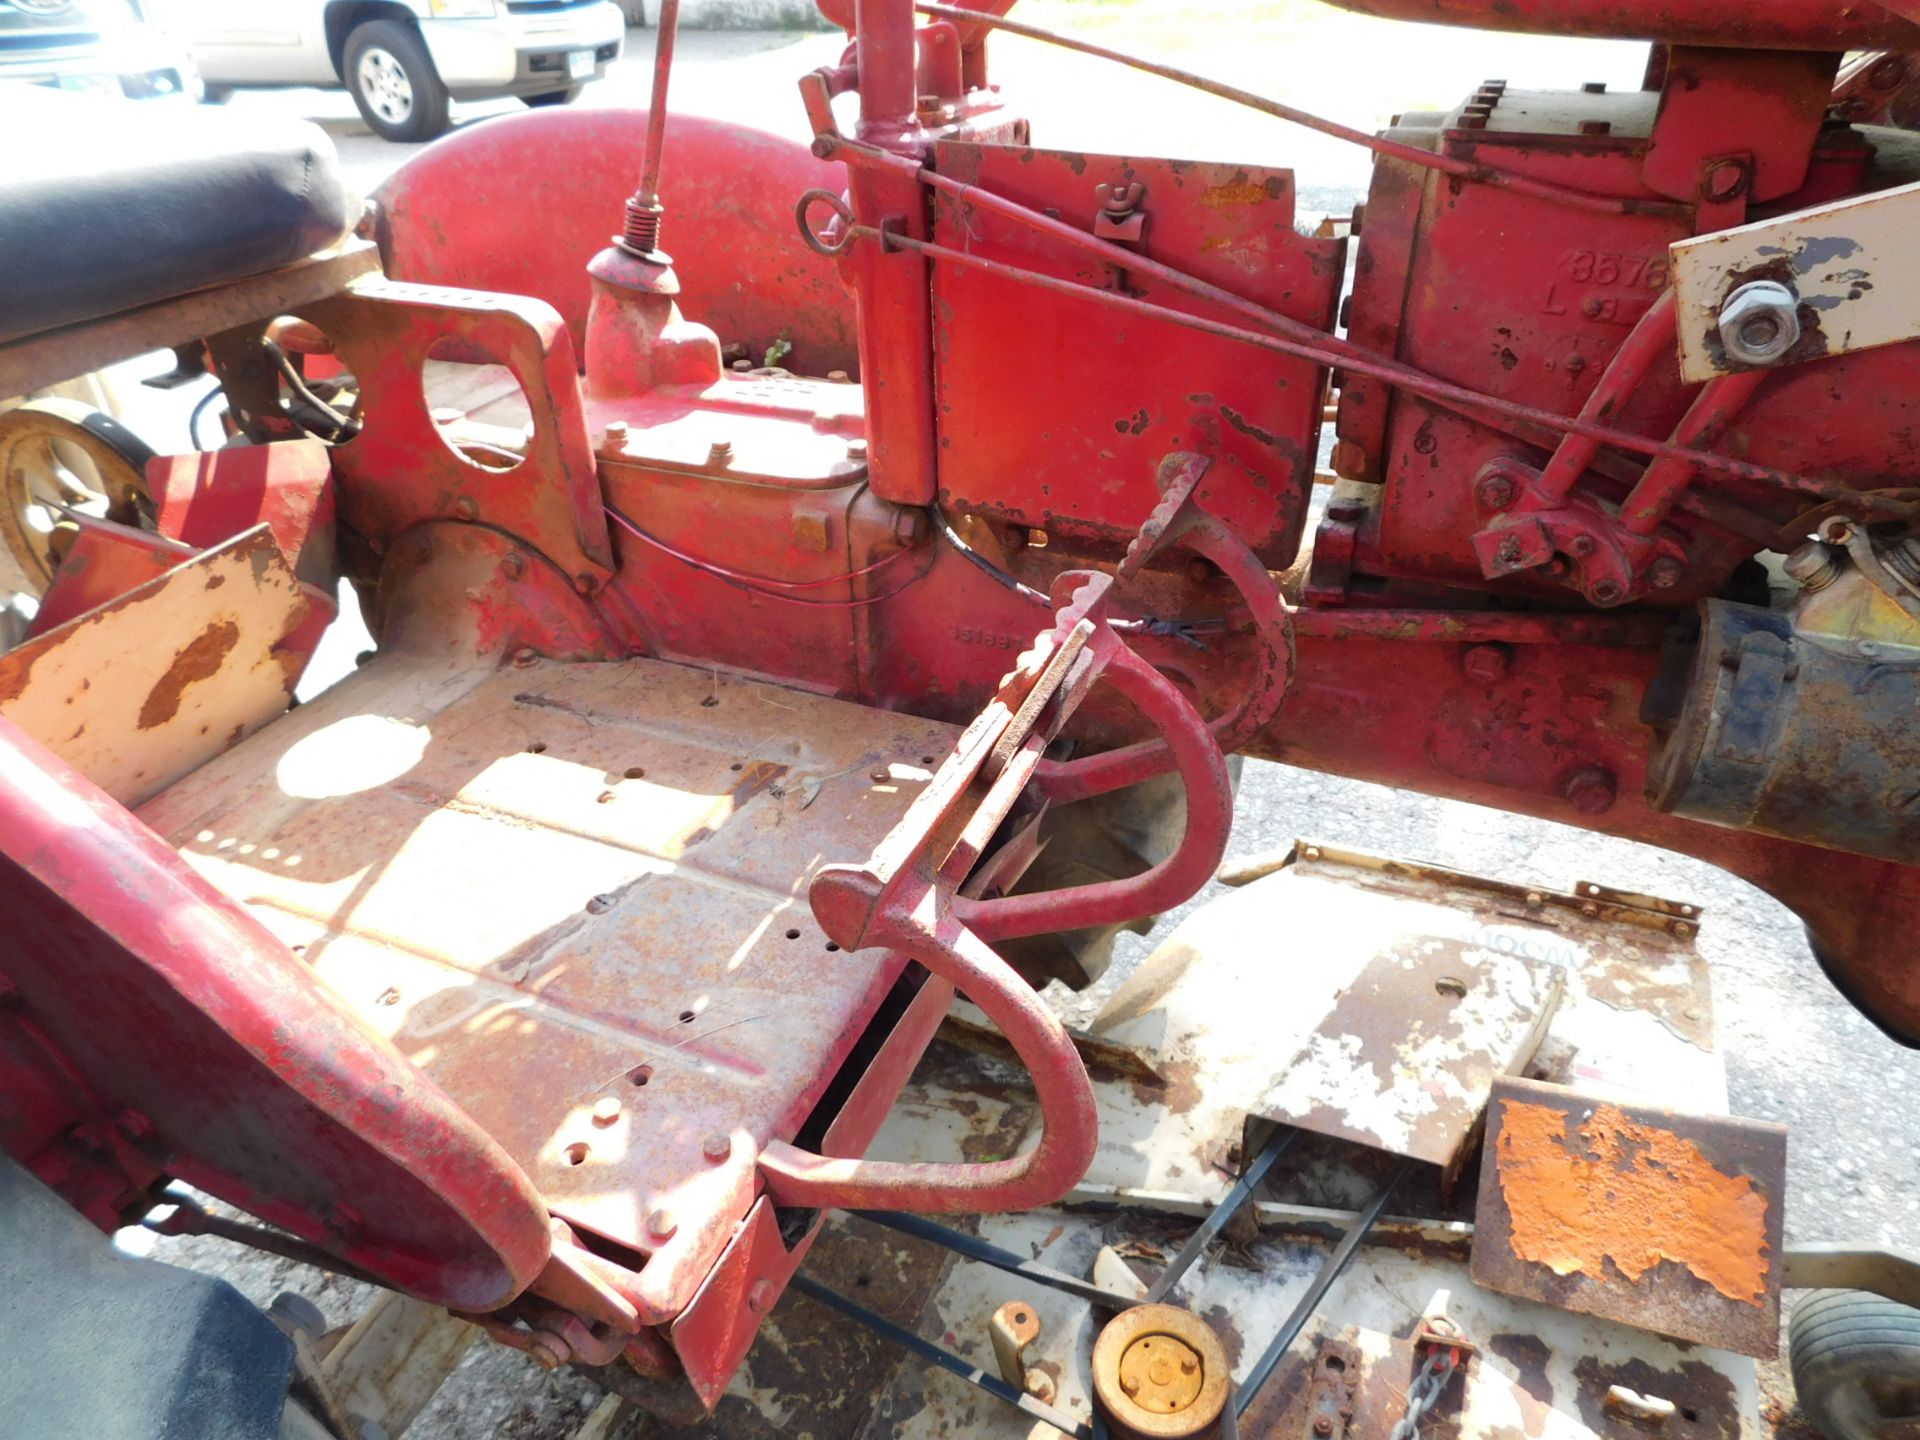 1957 Farmall Model 130 Tractor with Woods 72" Belly Mower - Image 11 of 22